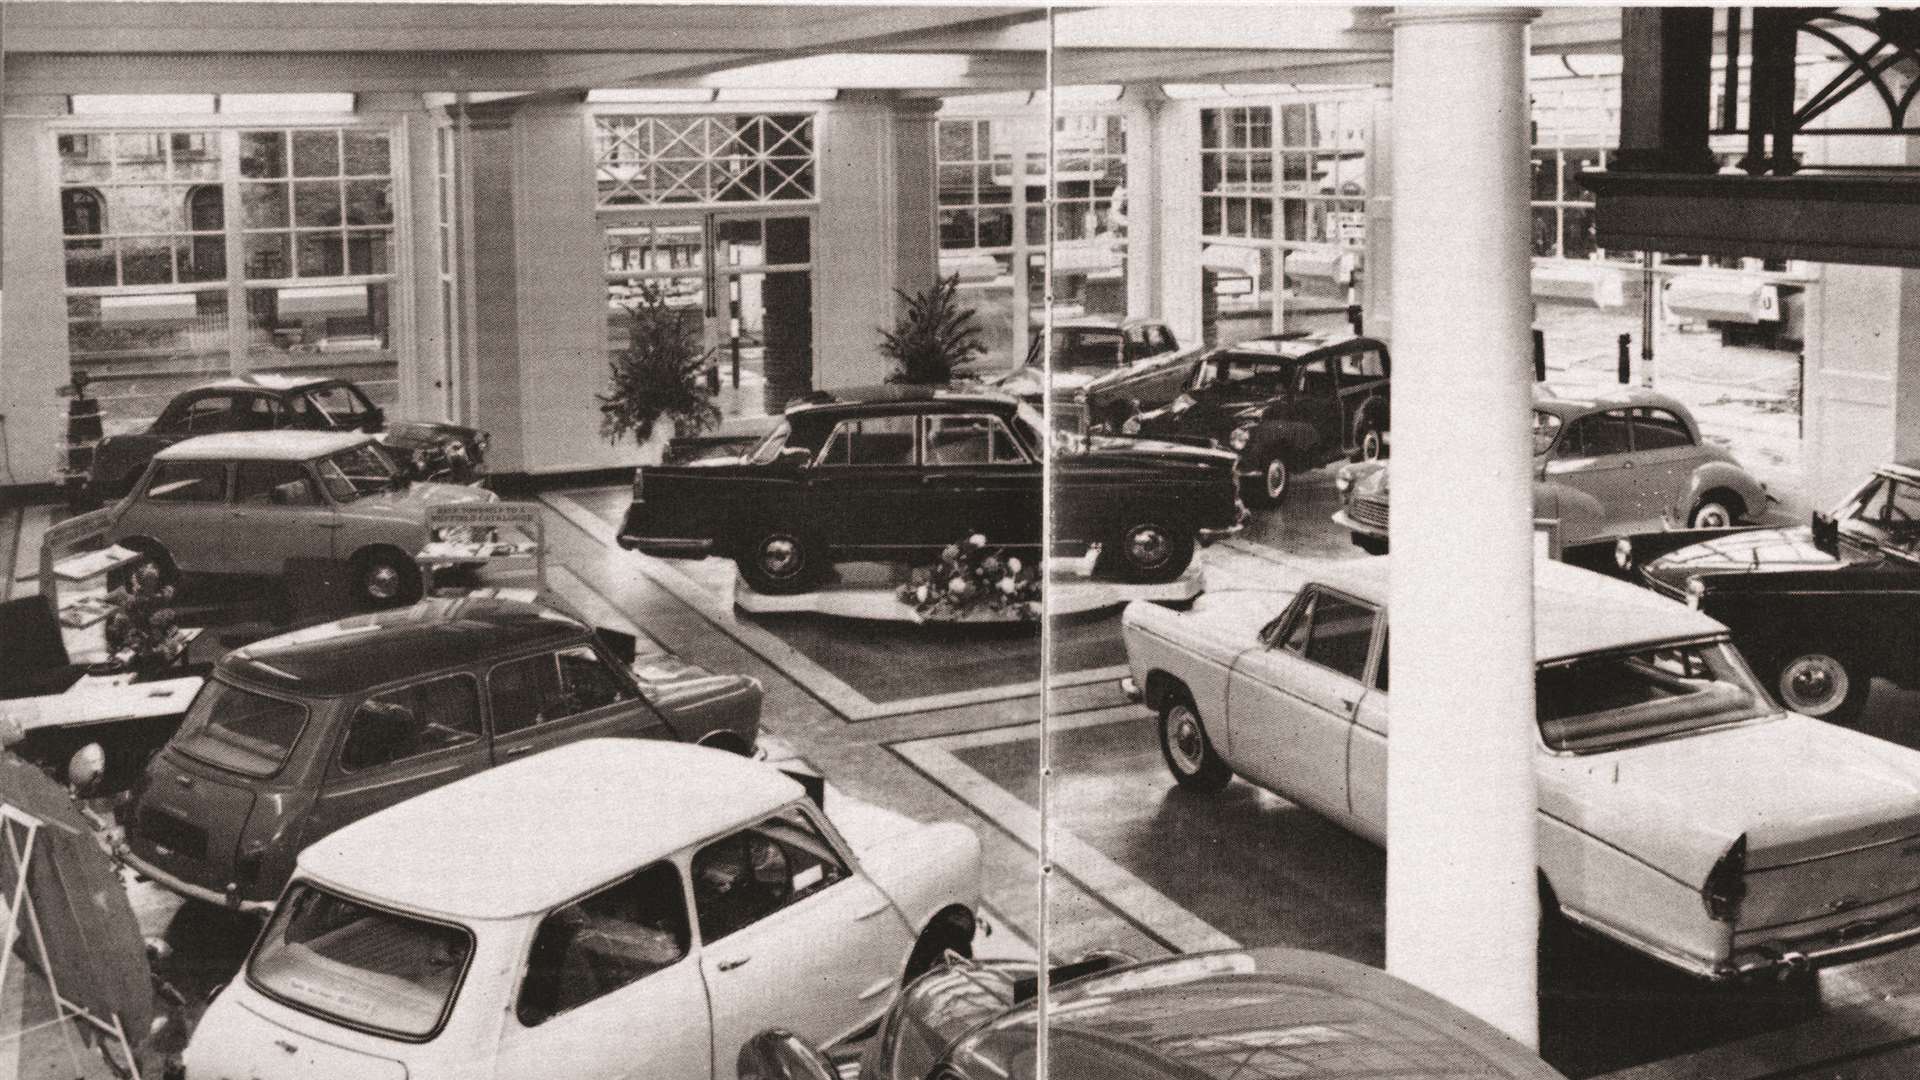 The Spital Street showroom in Dartford in the 1960s, stocked with Minis and models from Austin and Morris